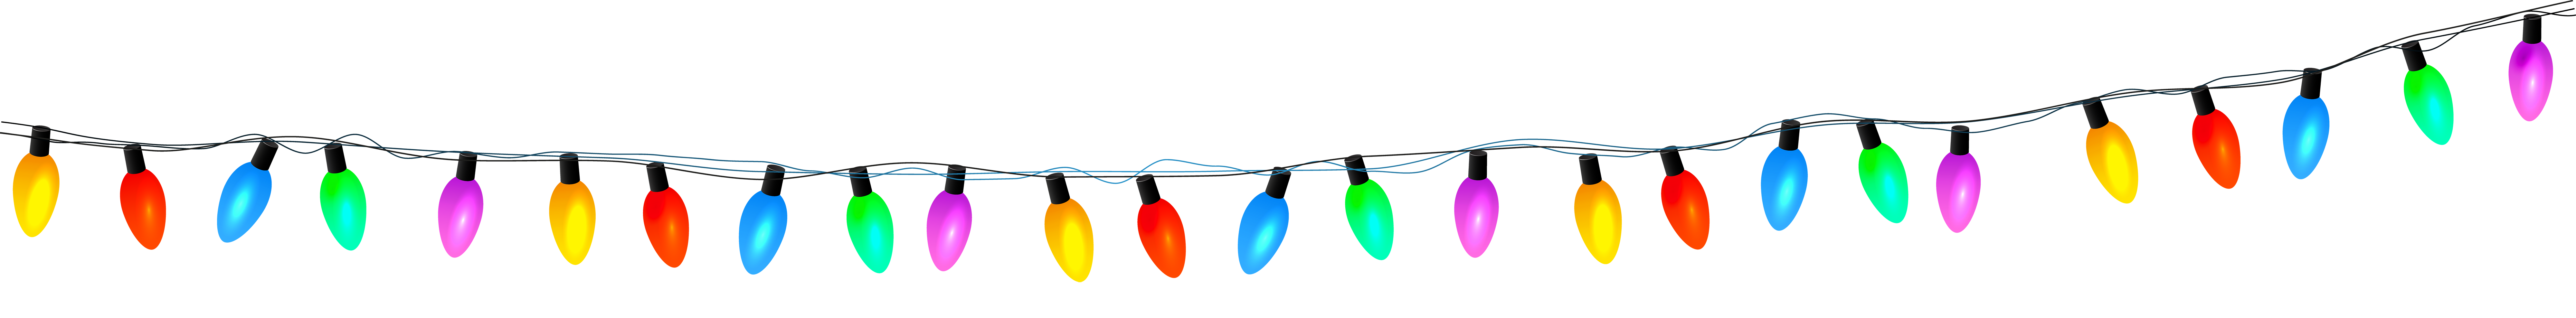 Free Christmas Lights Transparent Background, Download Free Christmas